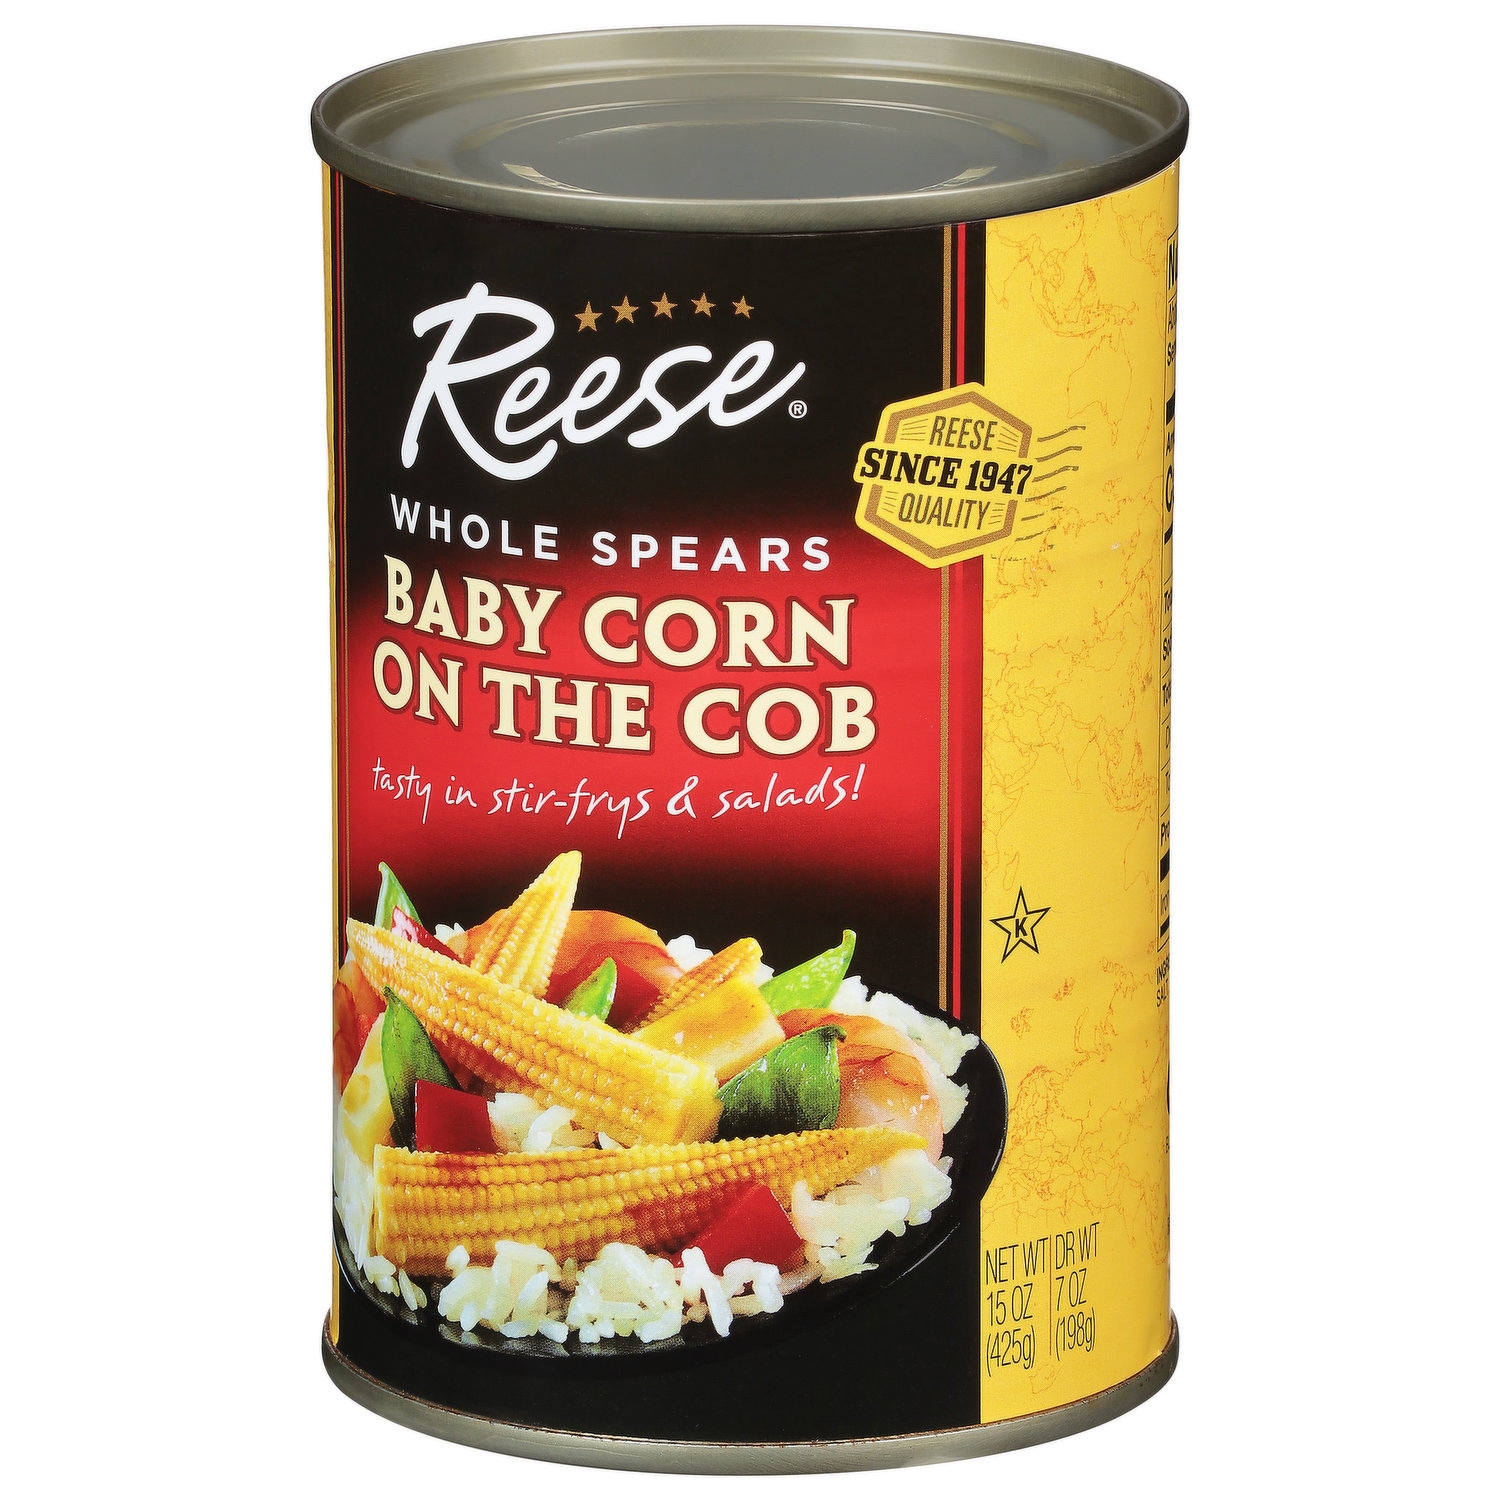 Reese Baby Corn on the Cob, Whole Spears